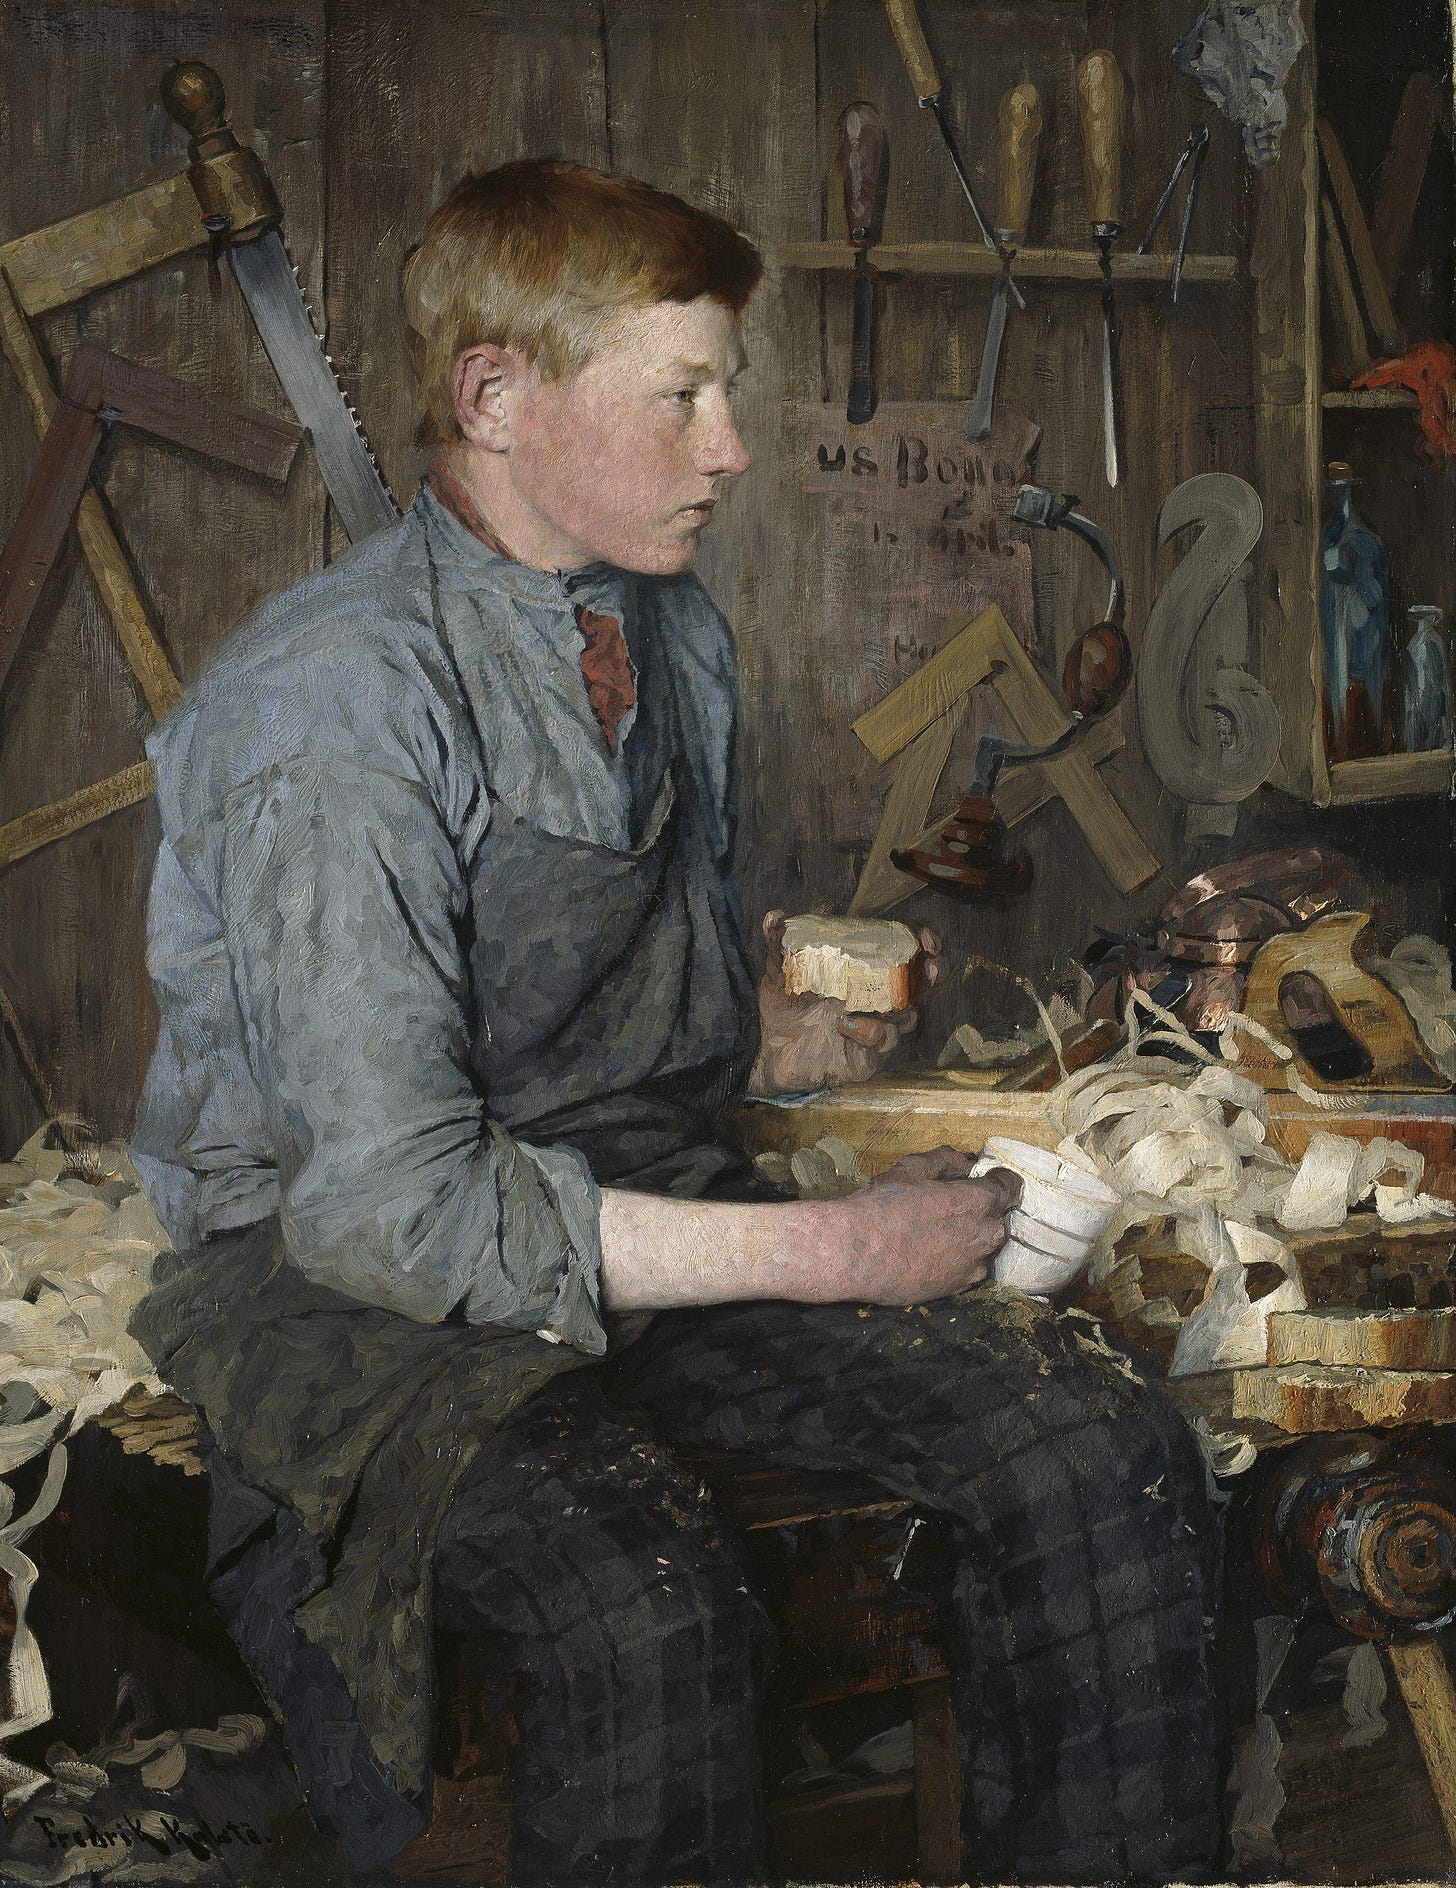 https://upload.wikimedia.org/wikipedia/commons/4/4c/Fredrik_Kolst%C3%B8_-_The_young_Carpenter_-_NG.M.01587_-_National_Museum_of_Art%2C_Architecture_and_Design.jpg